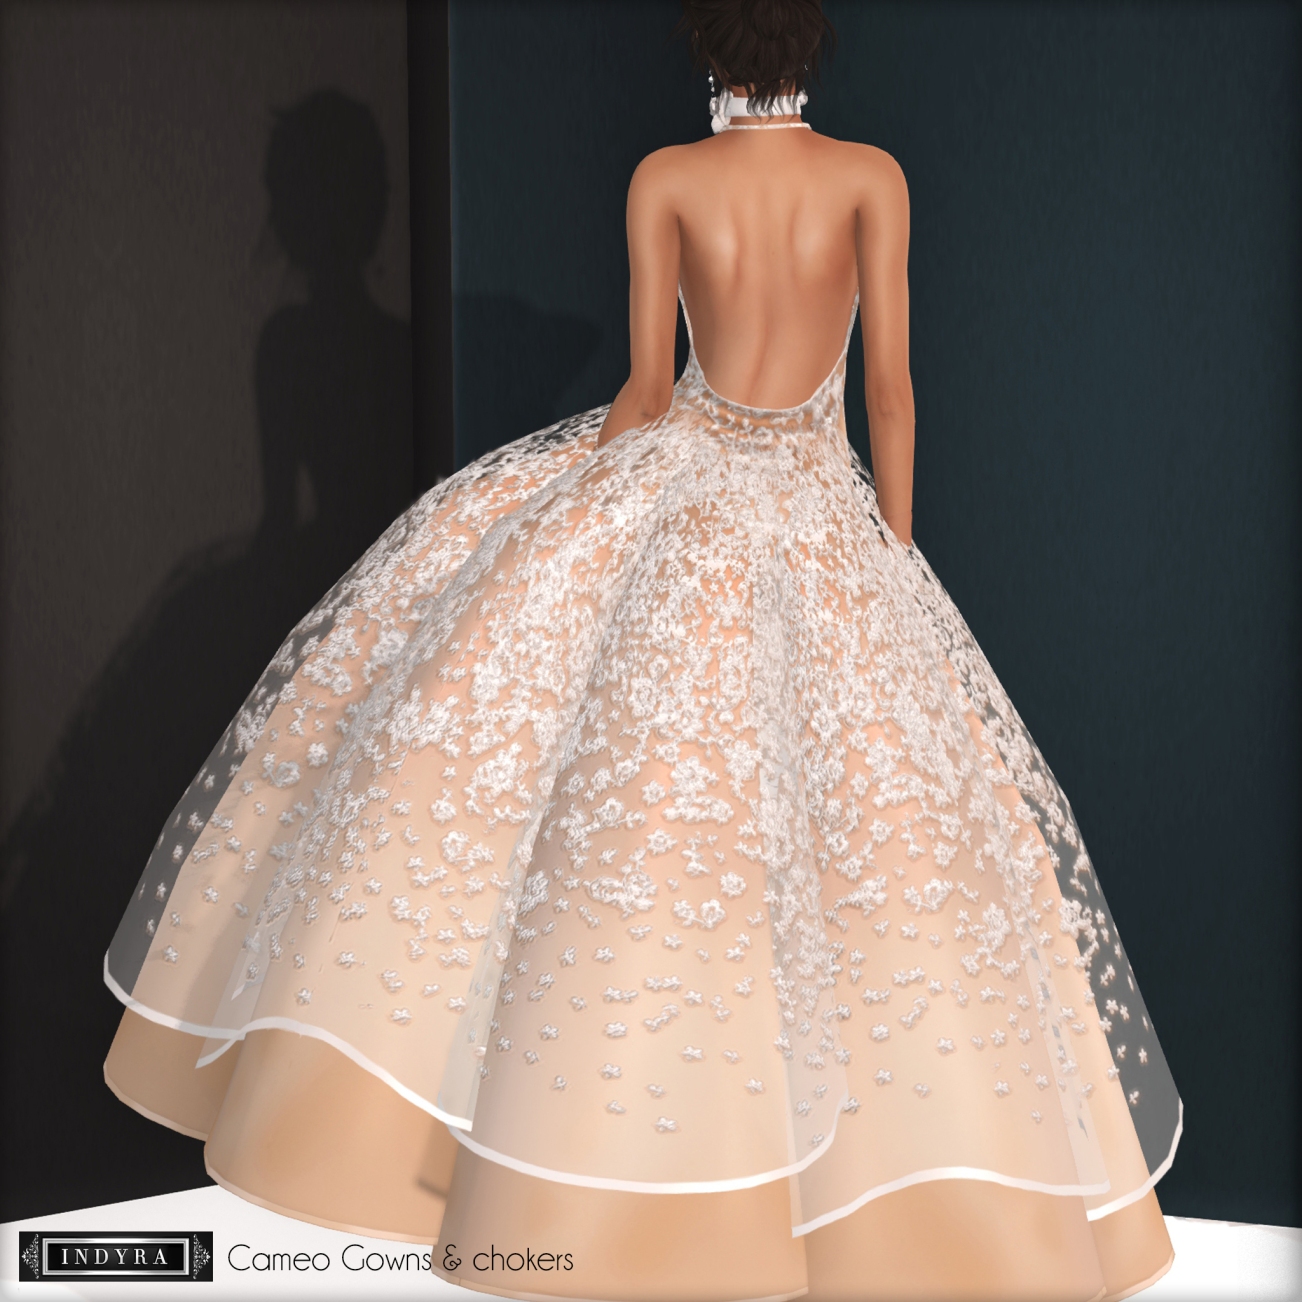 {Indyra} Cameo Gown version 2, back view